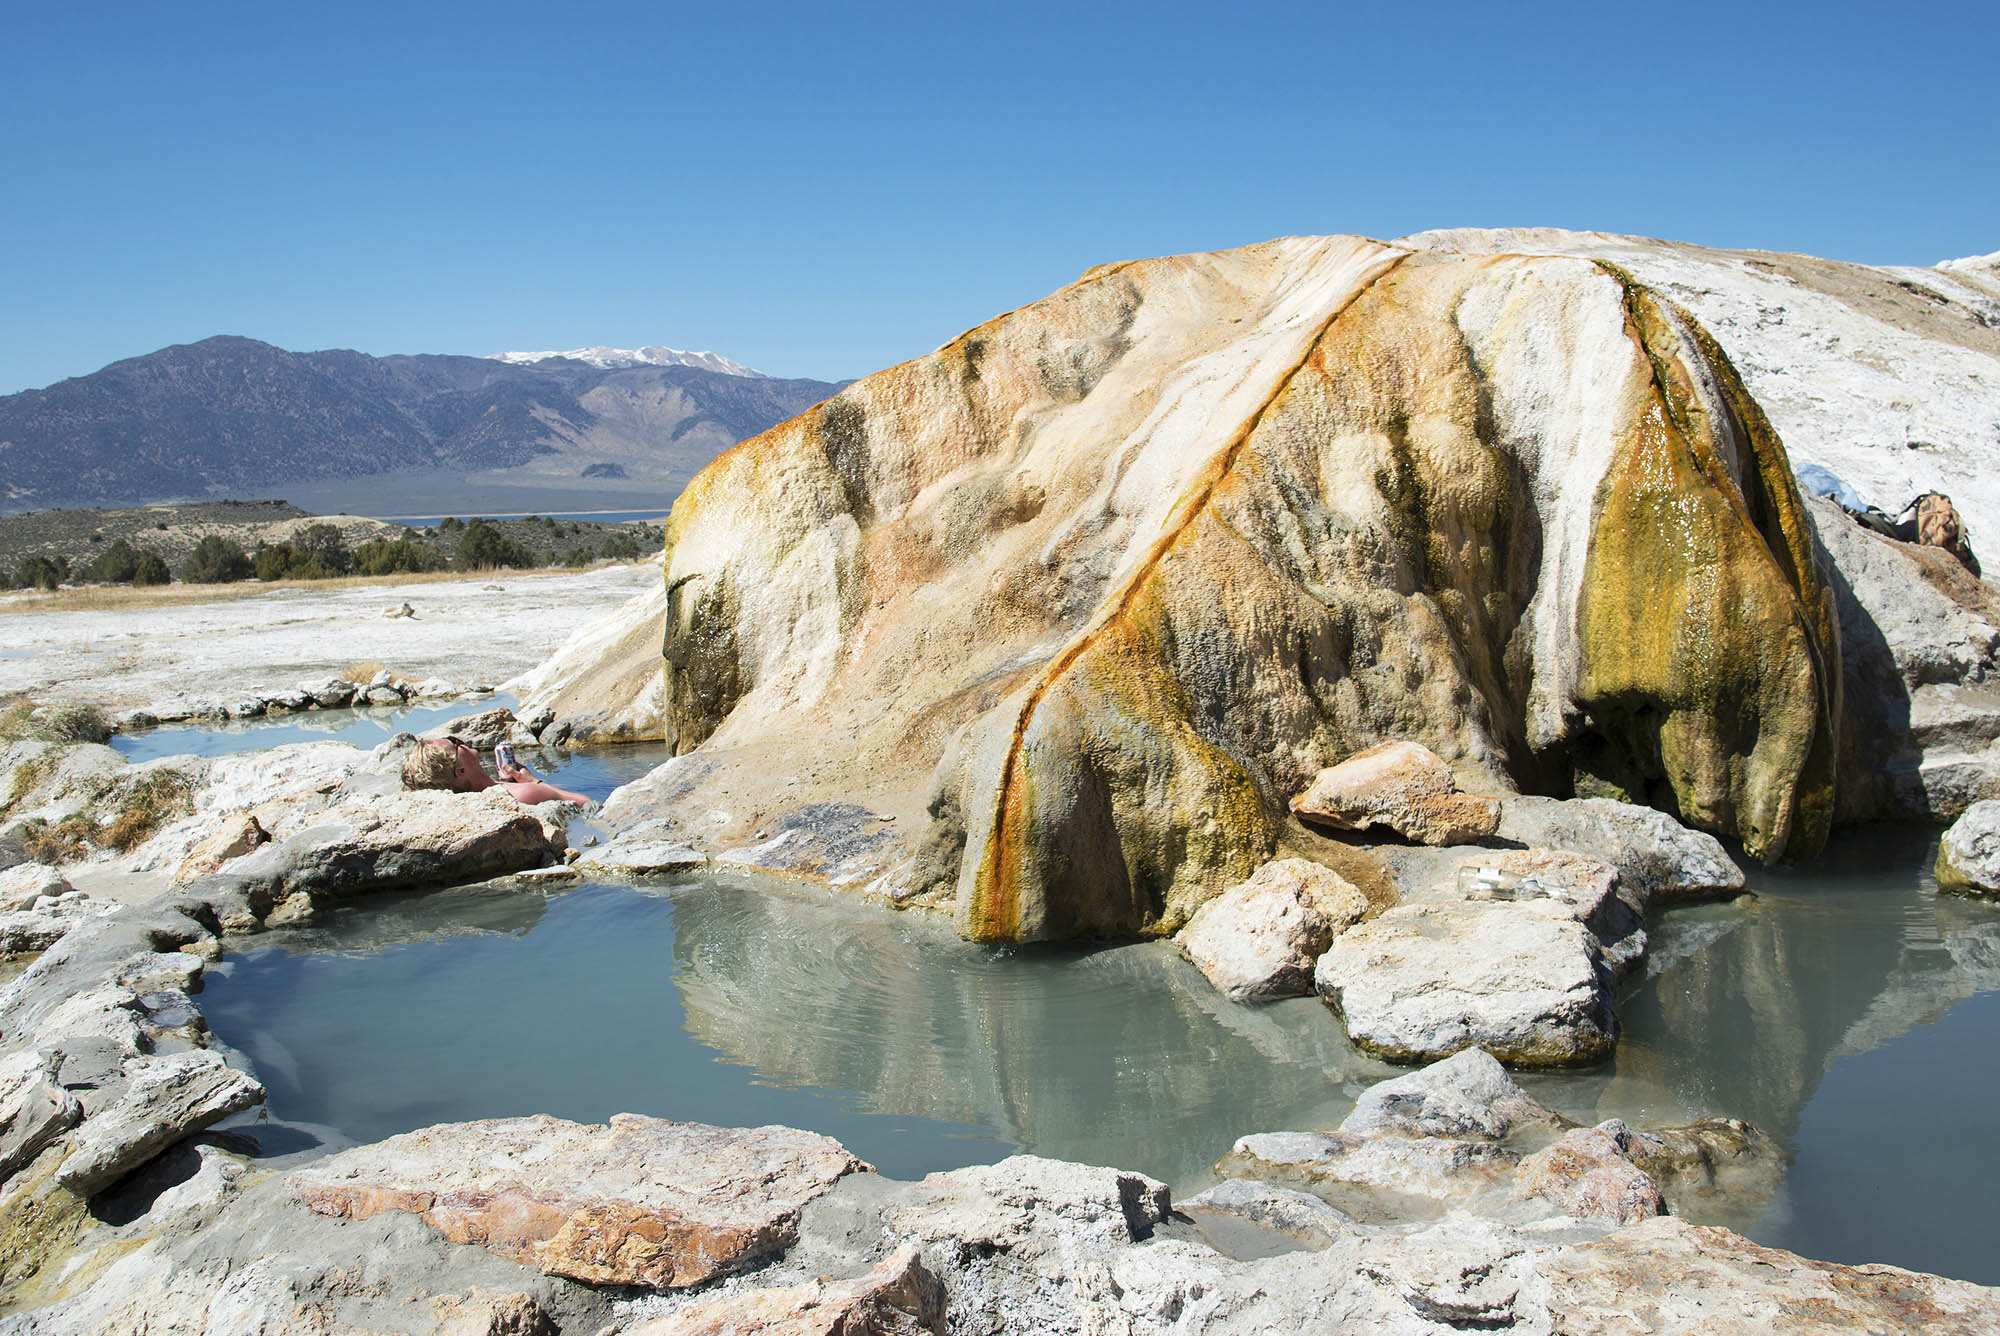 Set up camp at a local dispersed site and spend the weekend relaxing at this California hot spring.